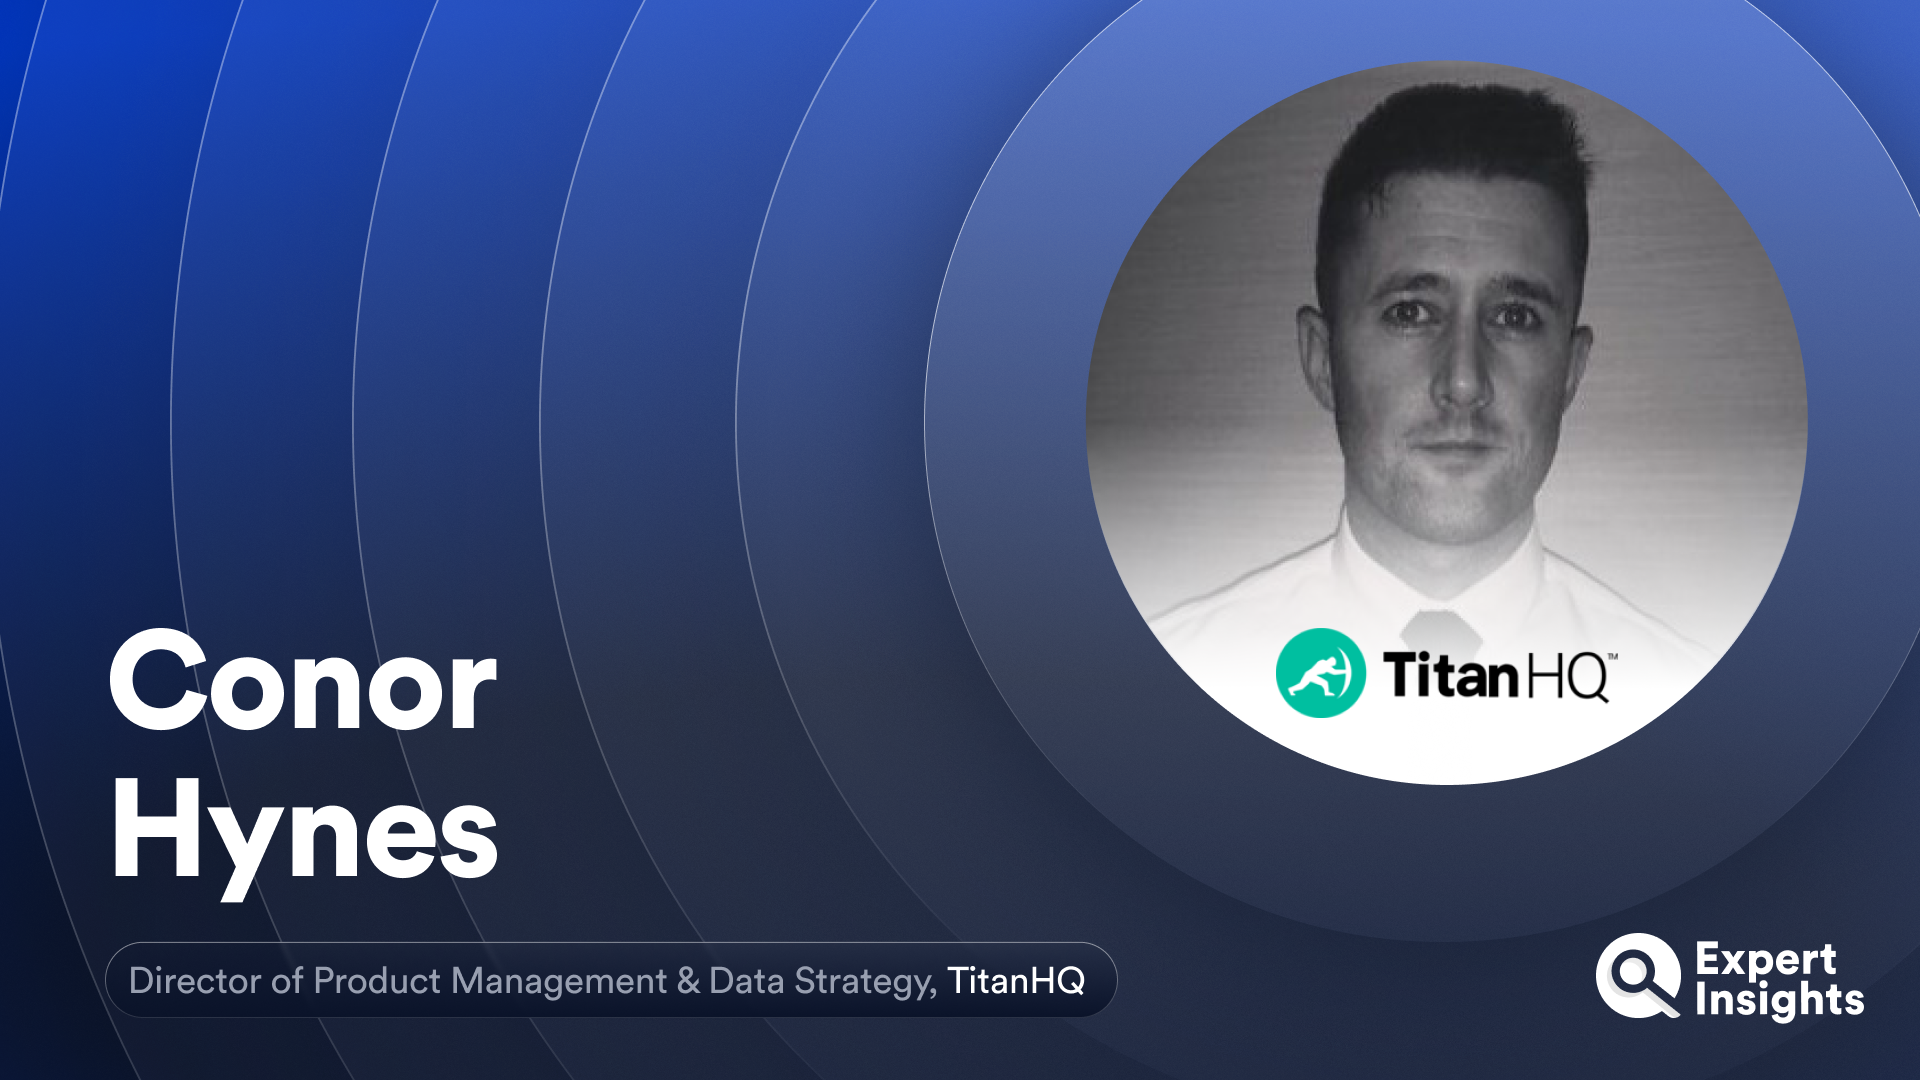 Expert Insights Interview With Conor Hynes, Director of Product Management & Data Strategy at TitanHQ